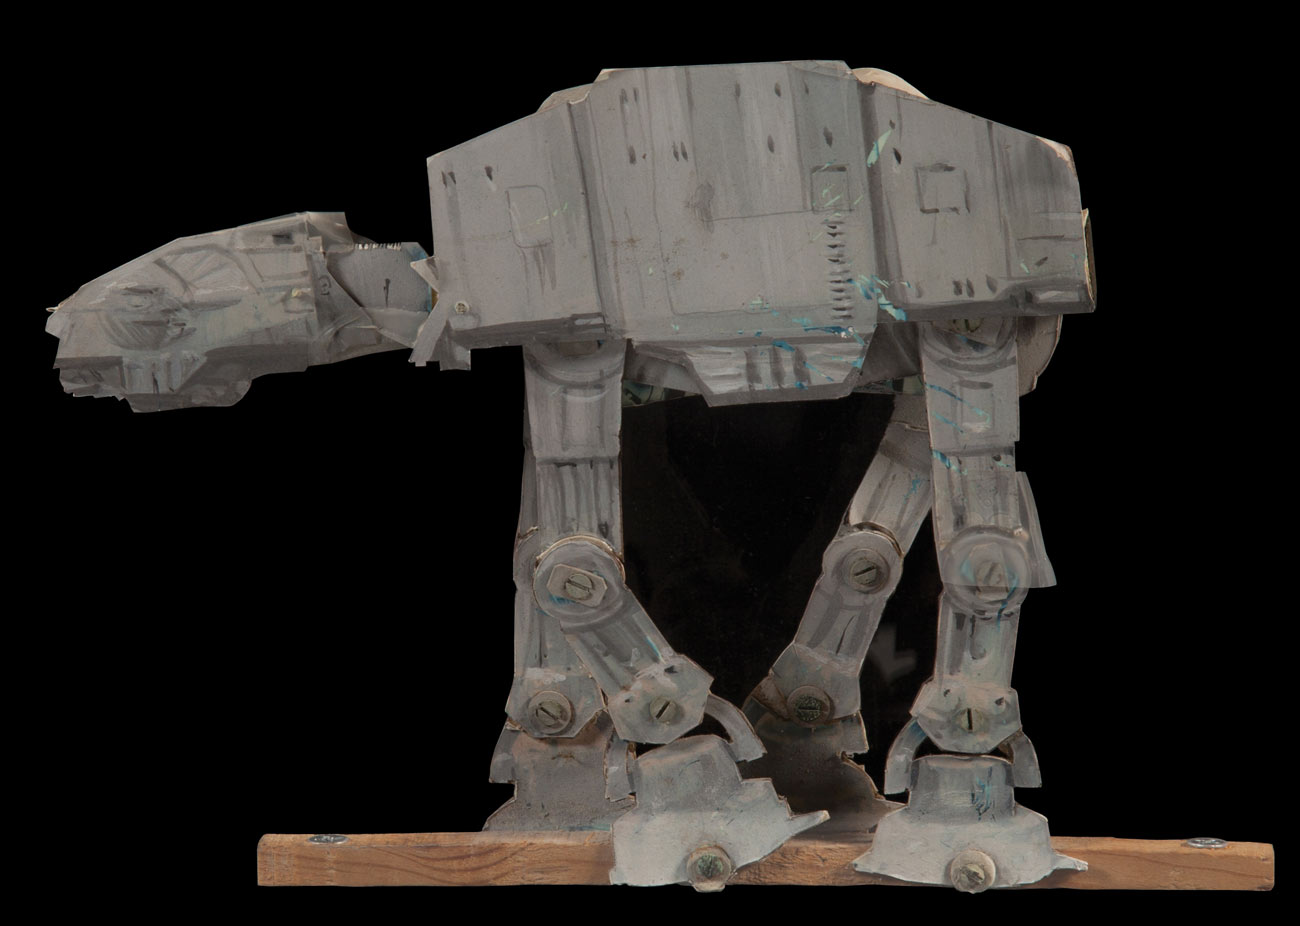 Original AT-AT model from The Empire Strikes Back